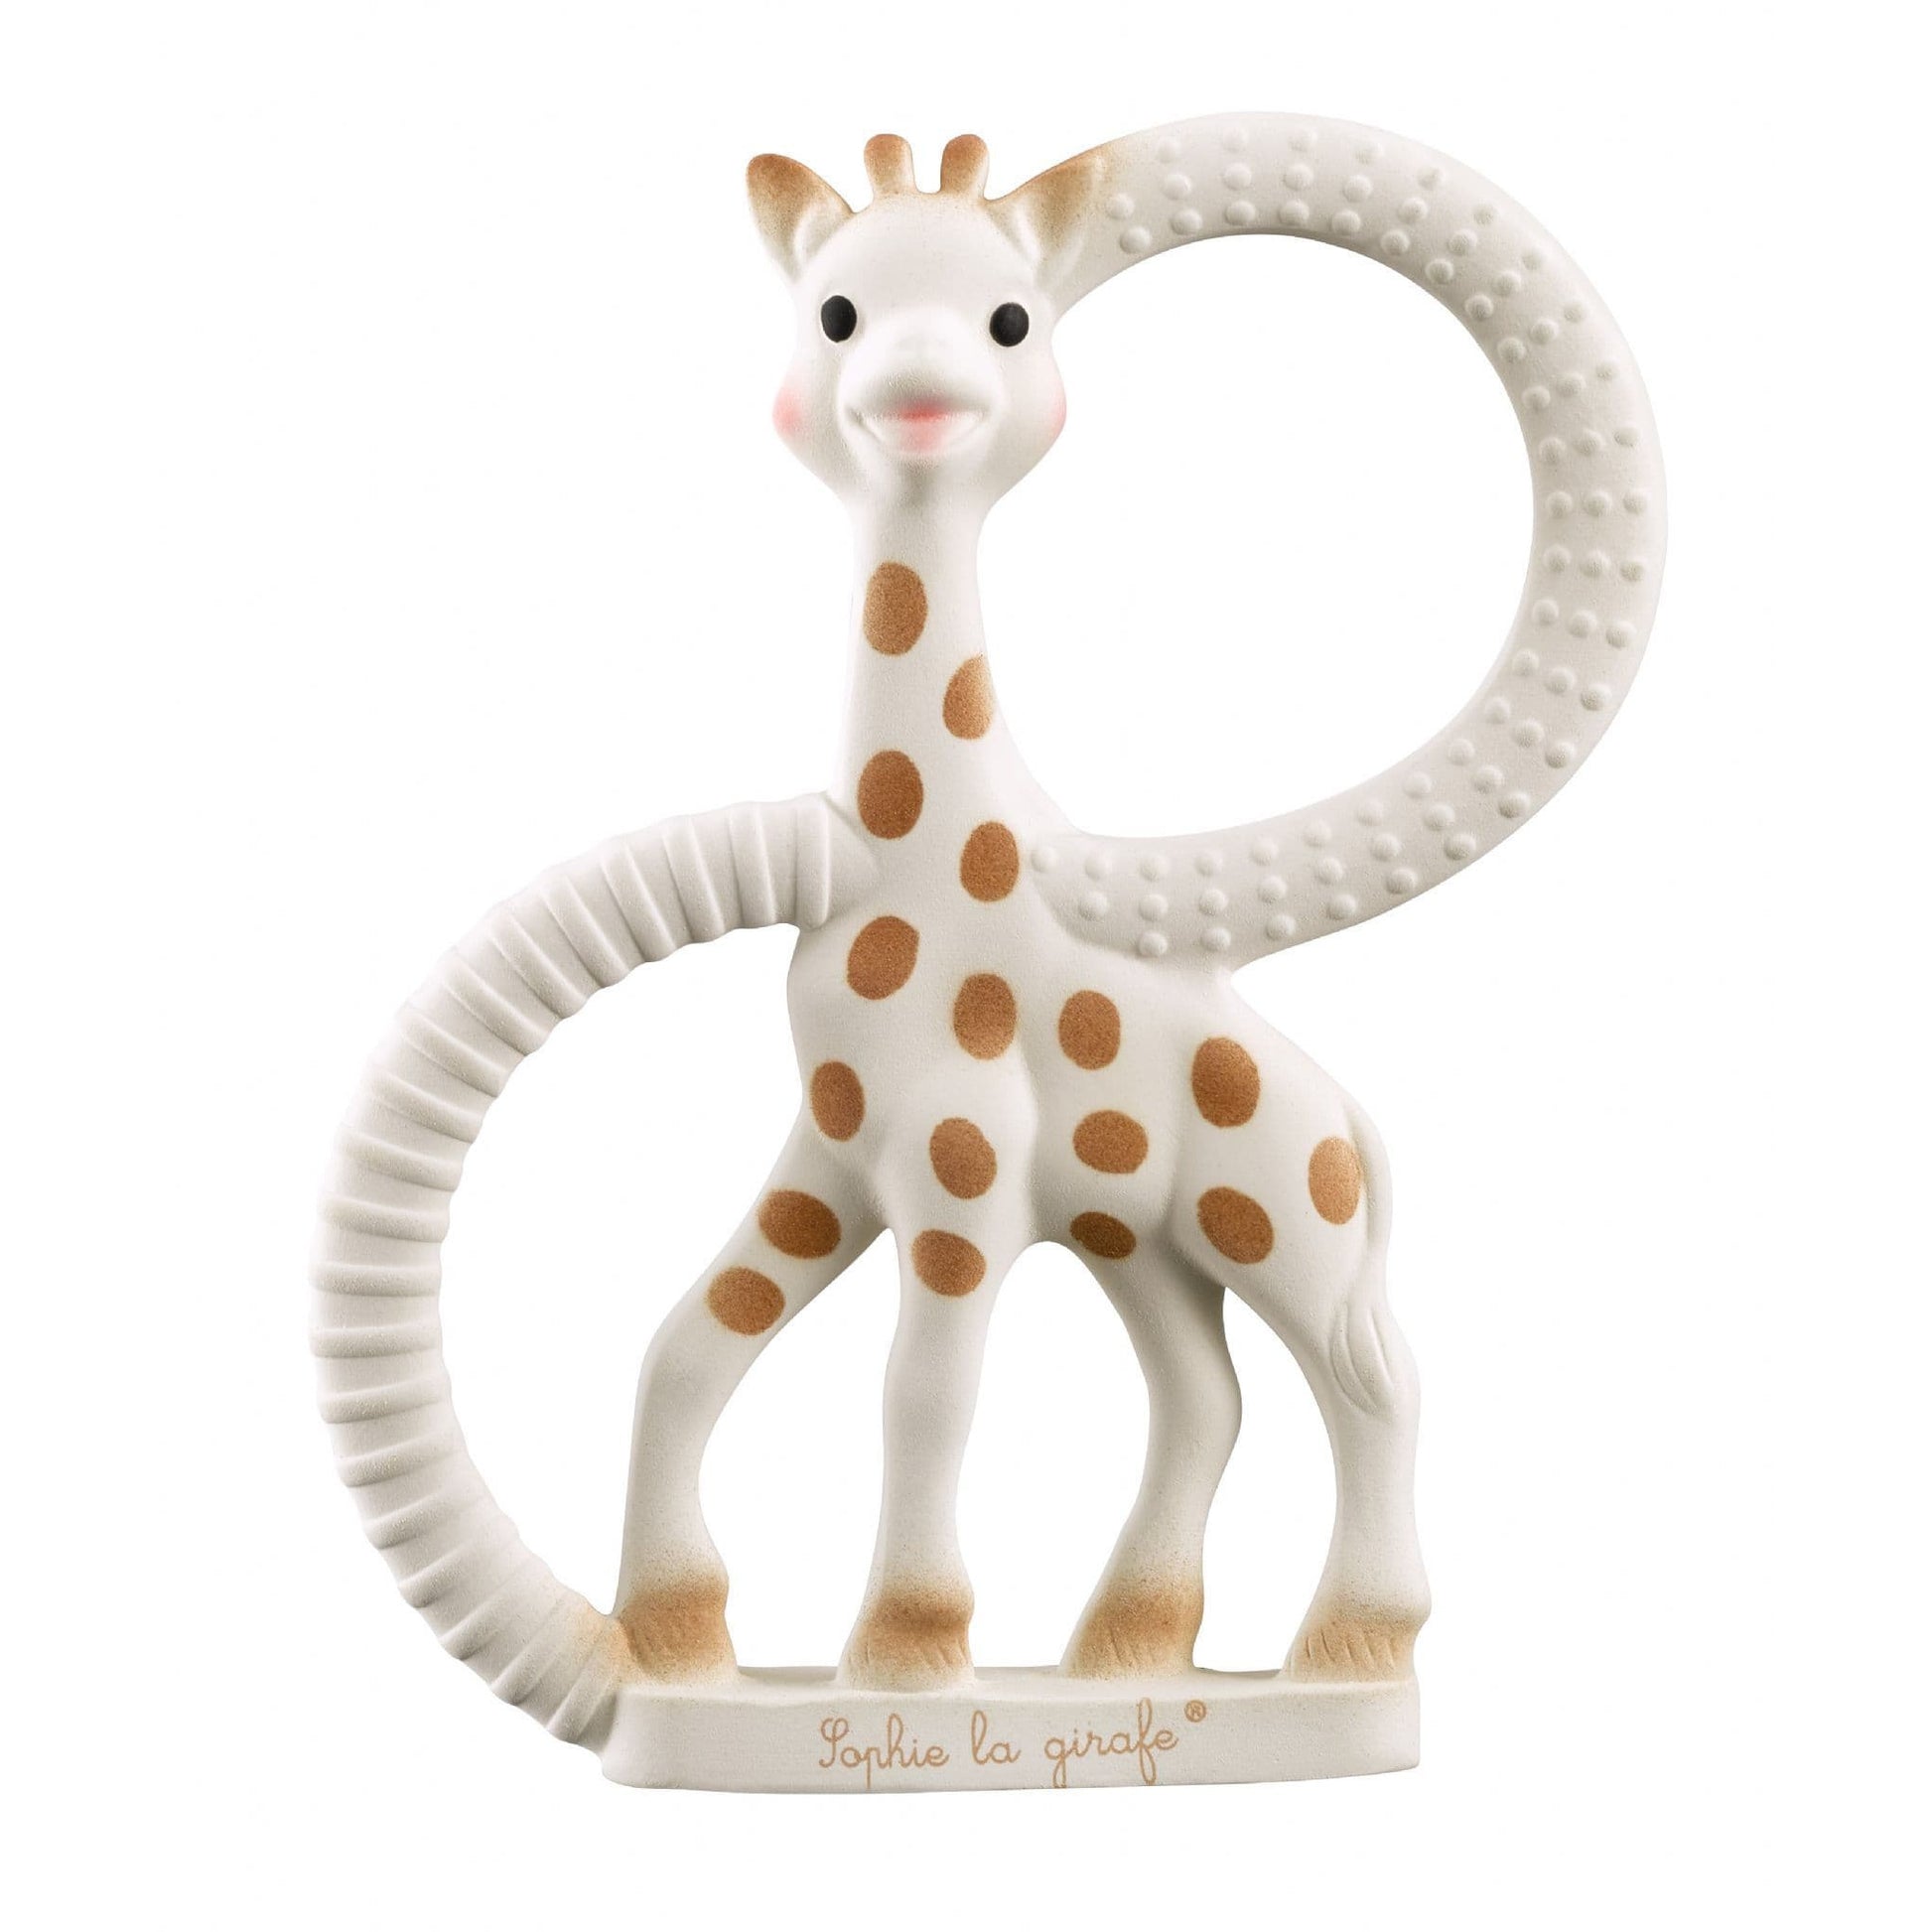 Sophie the Giraffe Teething Ring (Il etait une fois) - Muddy Boots Home UK